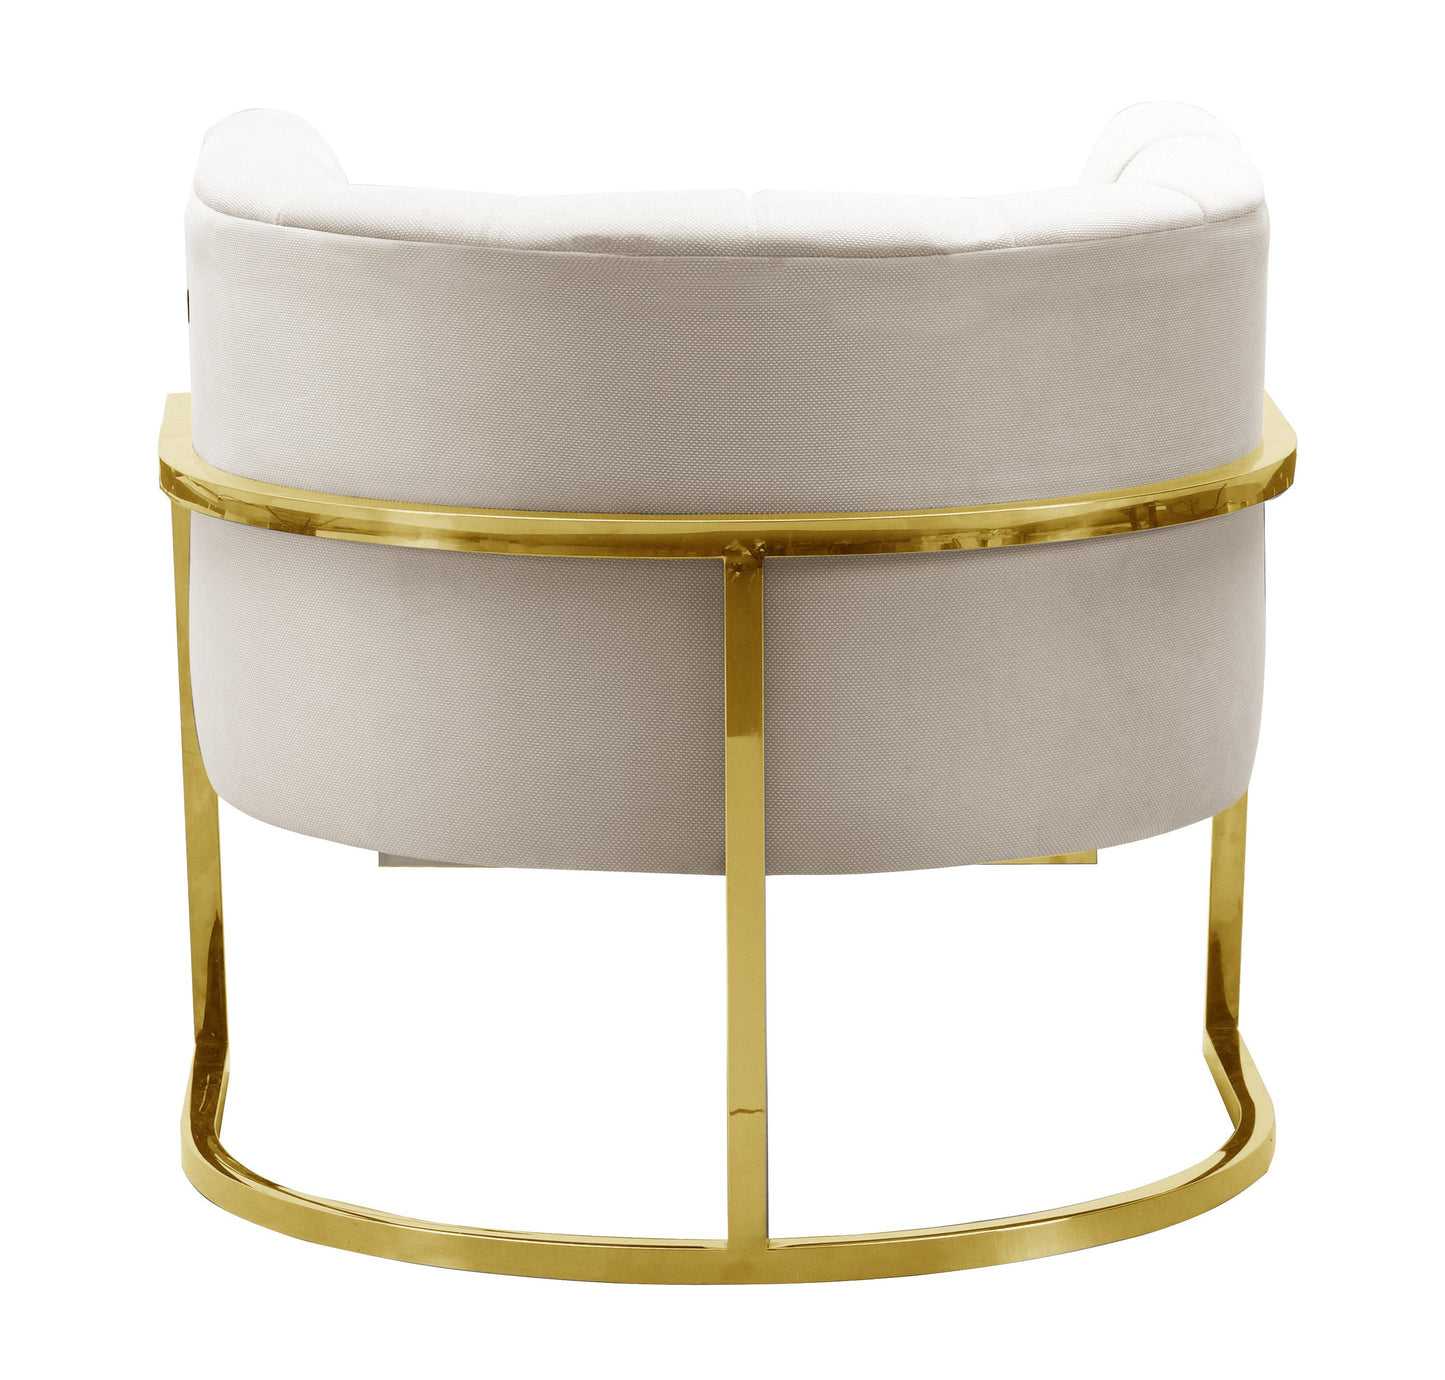 Magnolia Spotted Cream Chair Gold by TOV